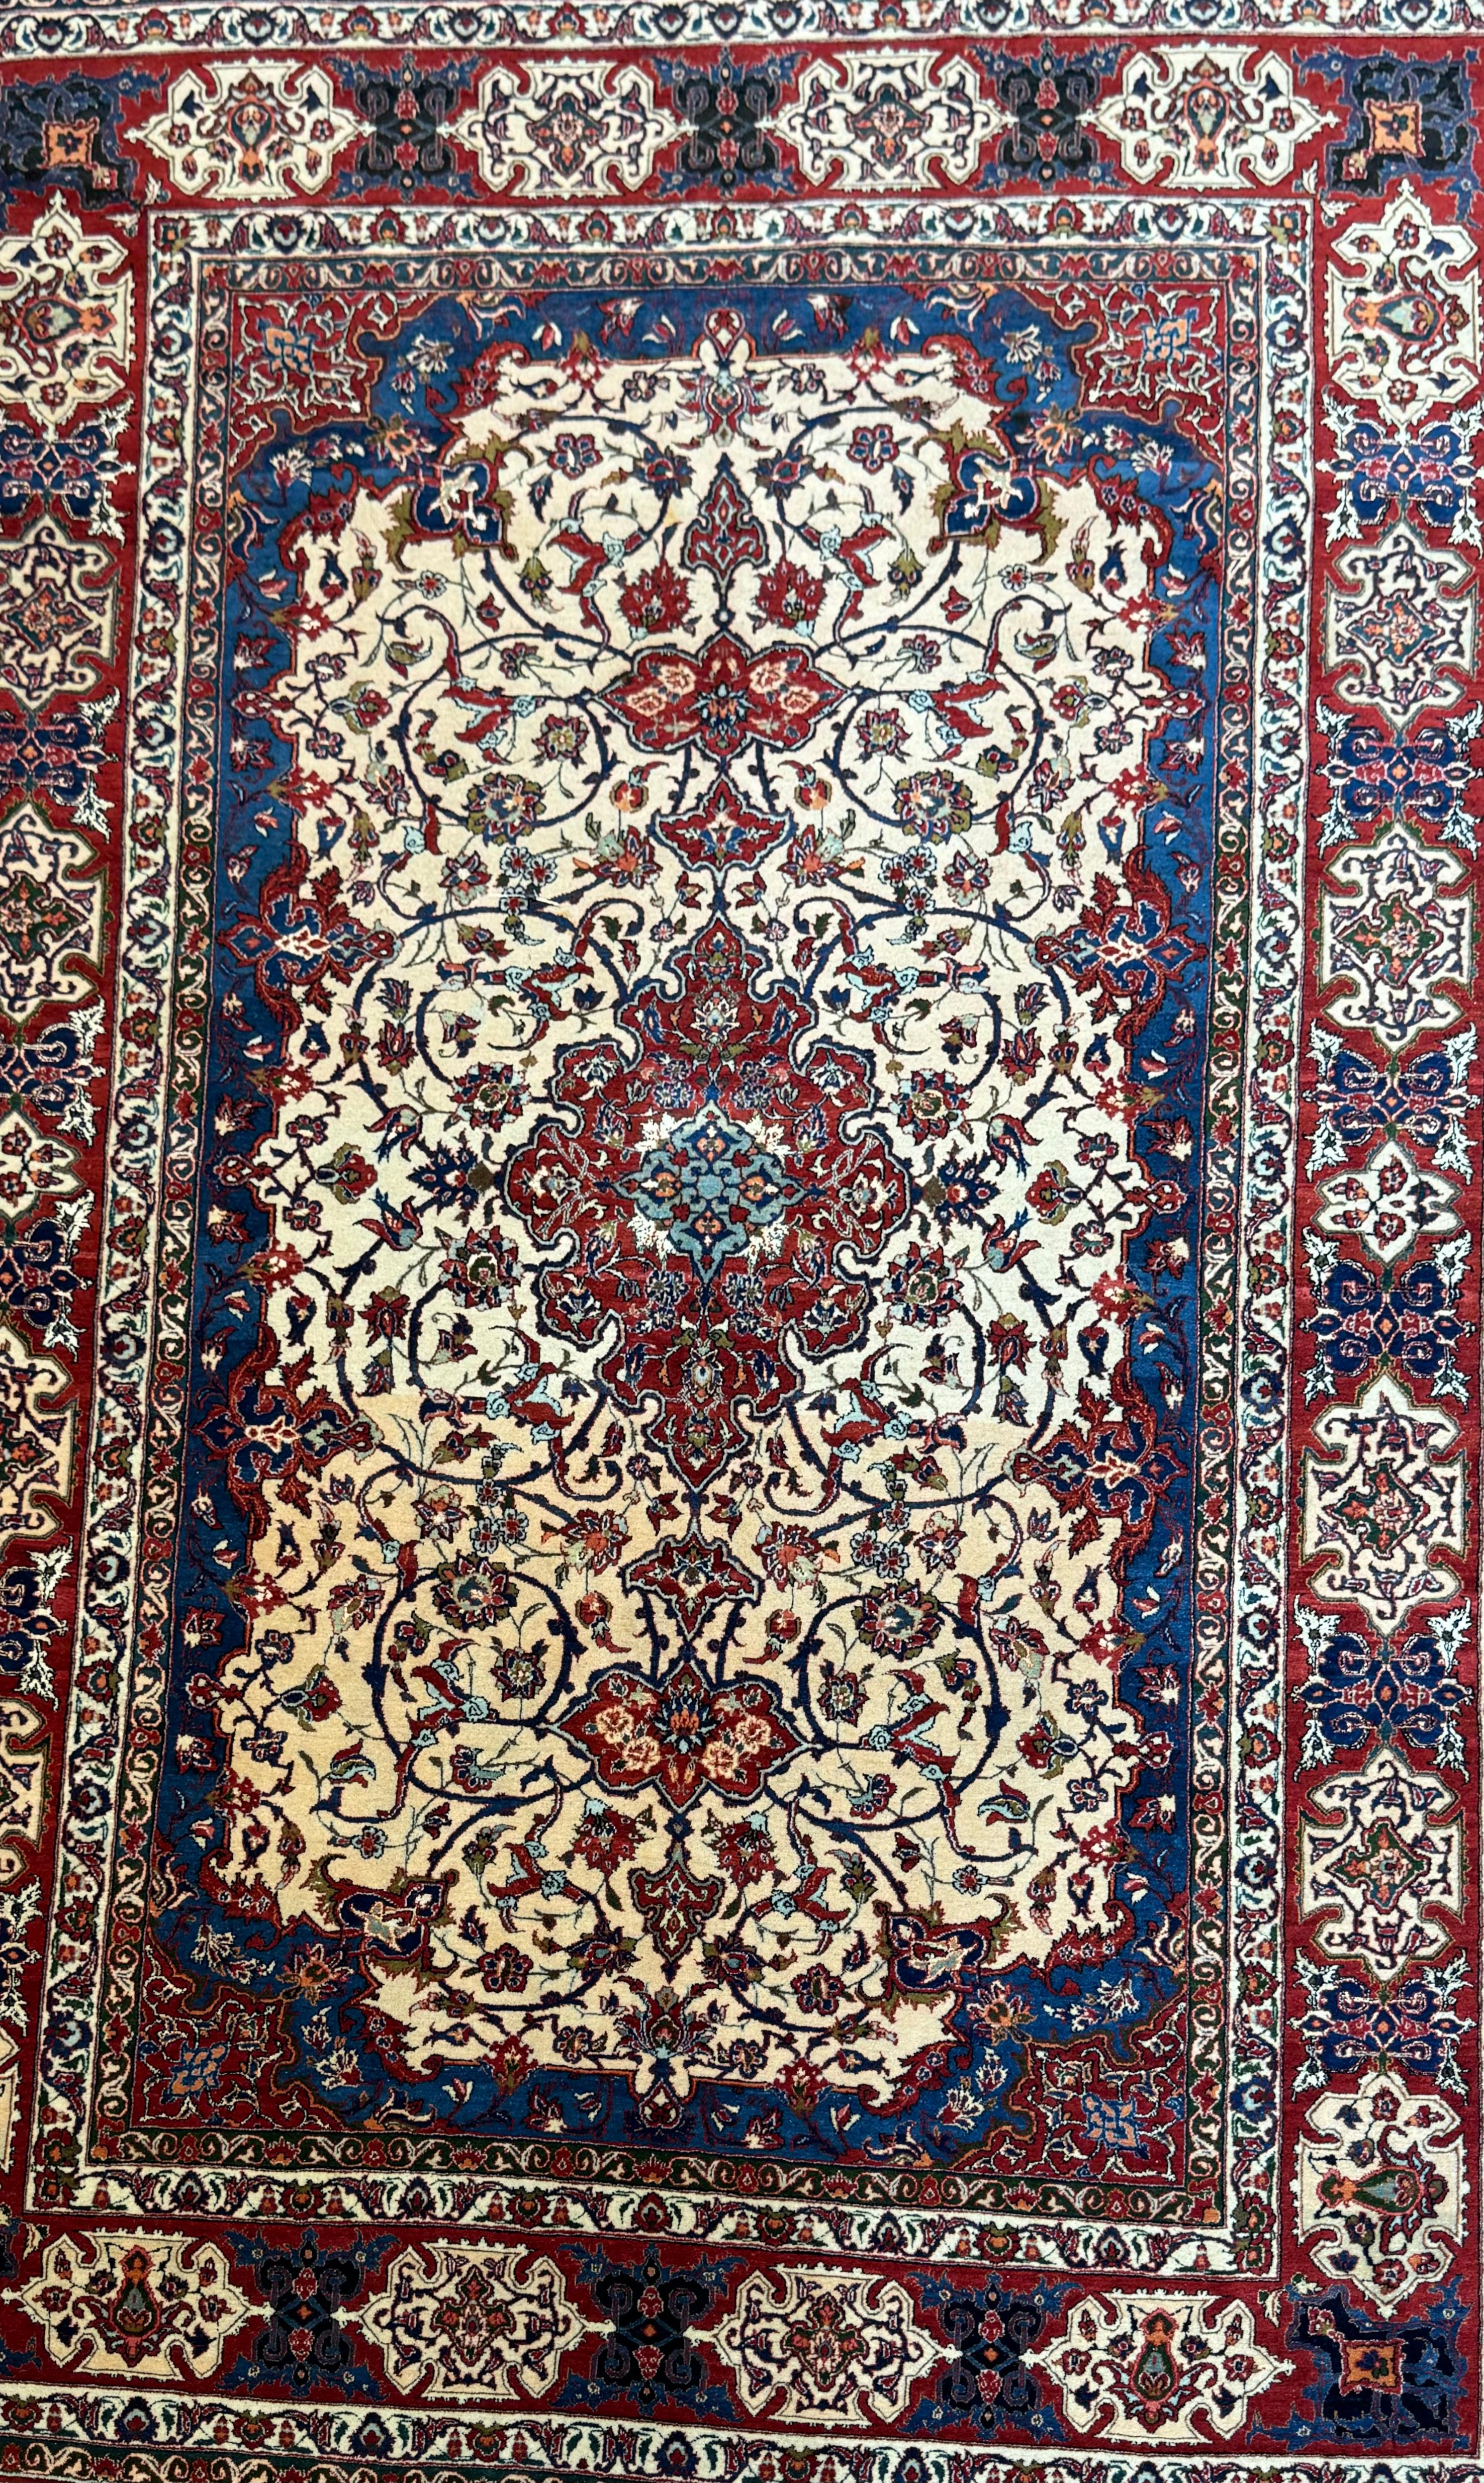 A Magnificent Semi Antique Persian Isfahan Rug that originates from Iran from the mid-20th century. This rug has beautiful color combinations and is in excellent condition.